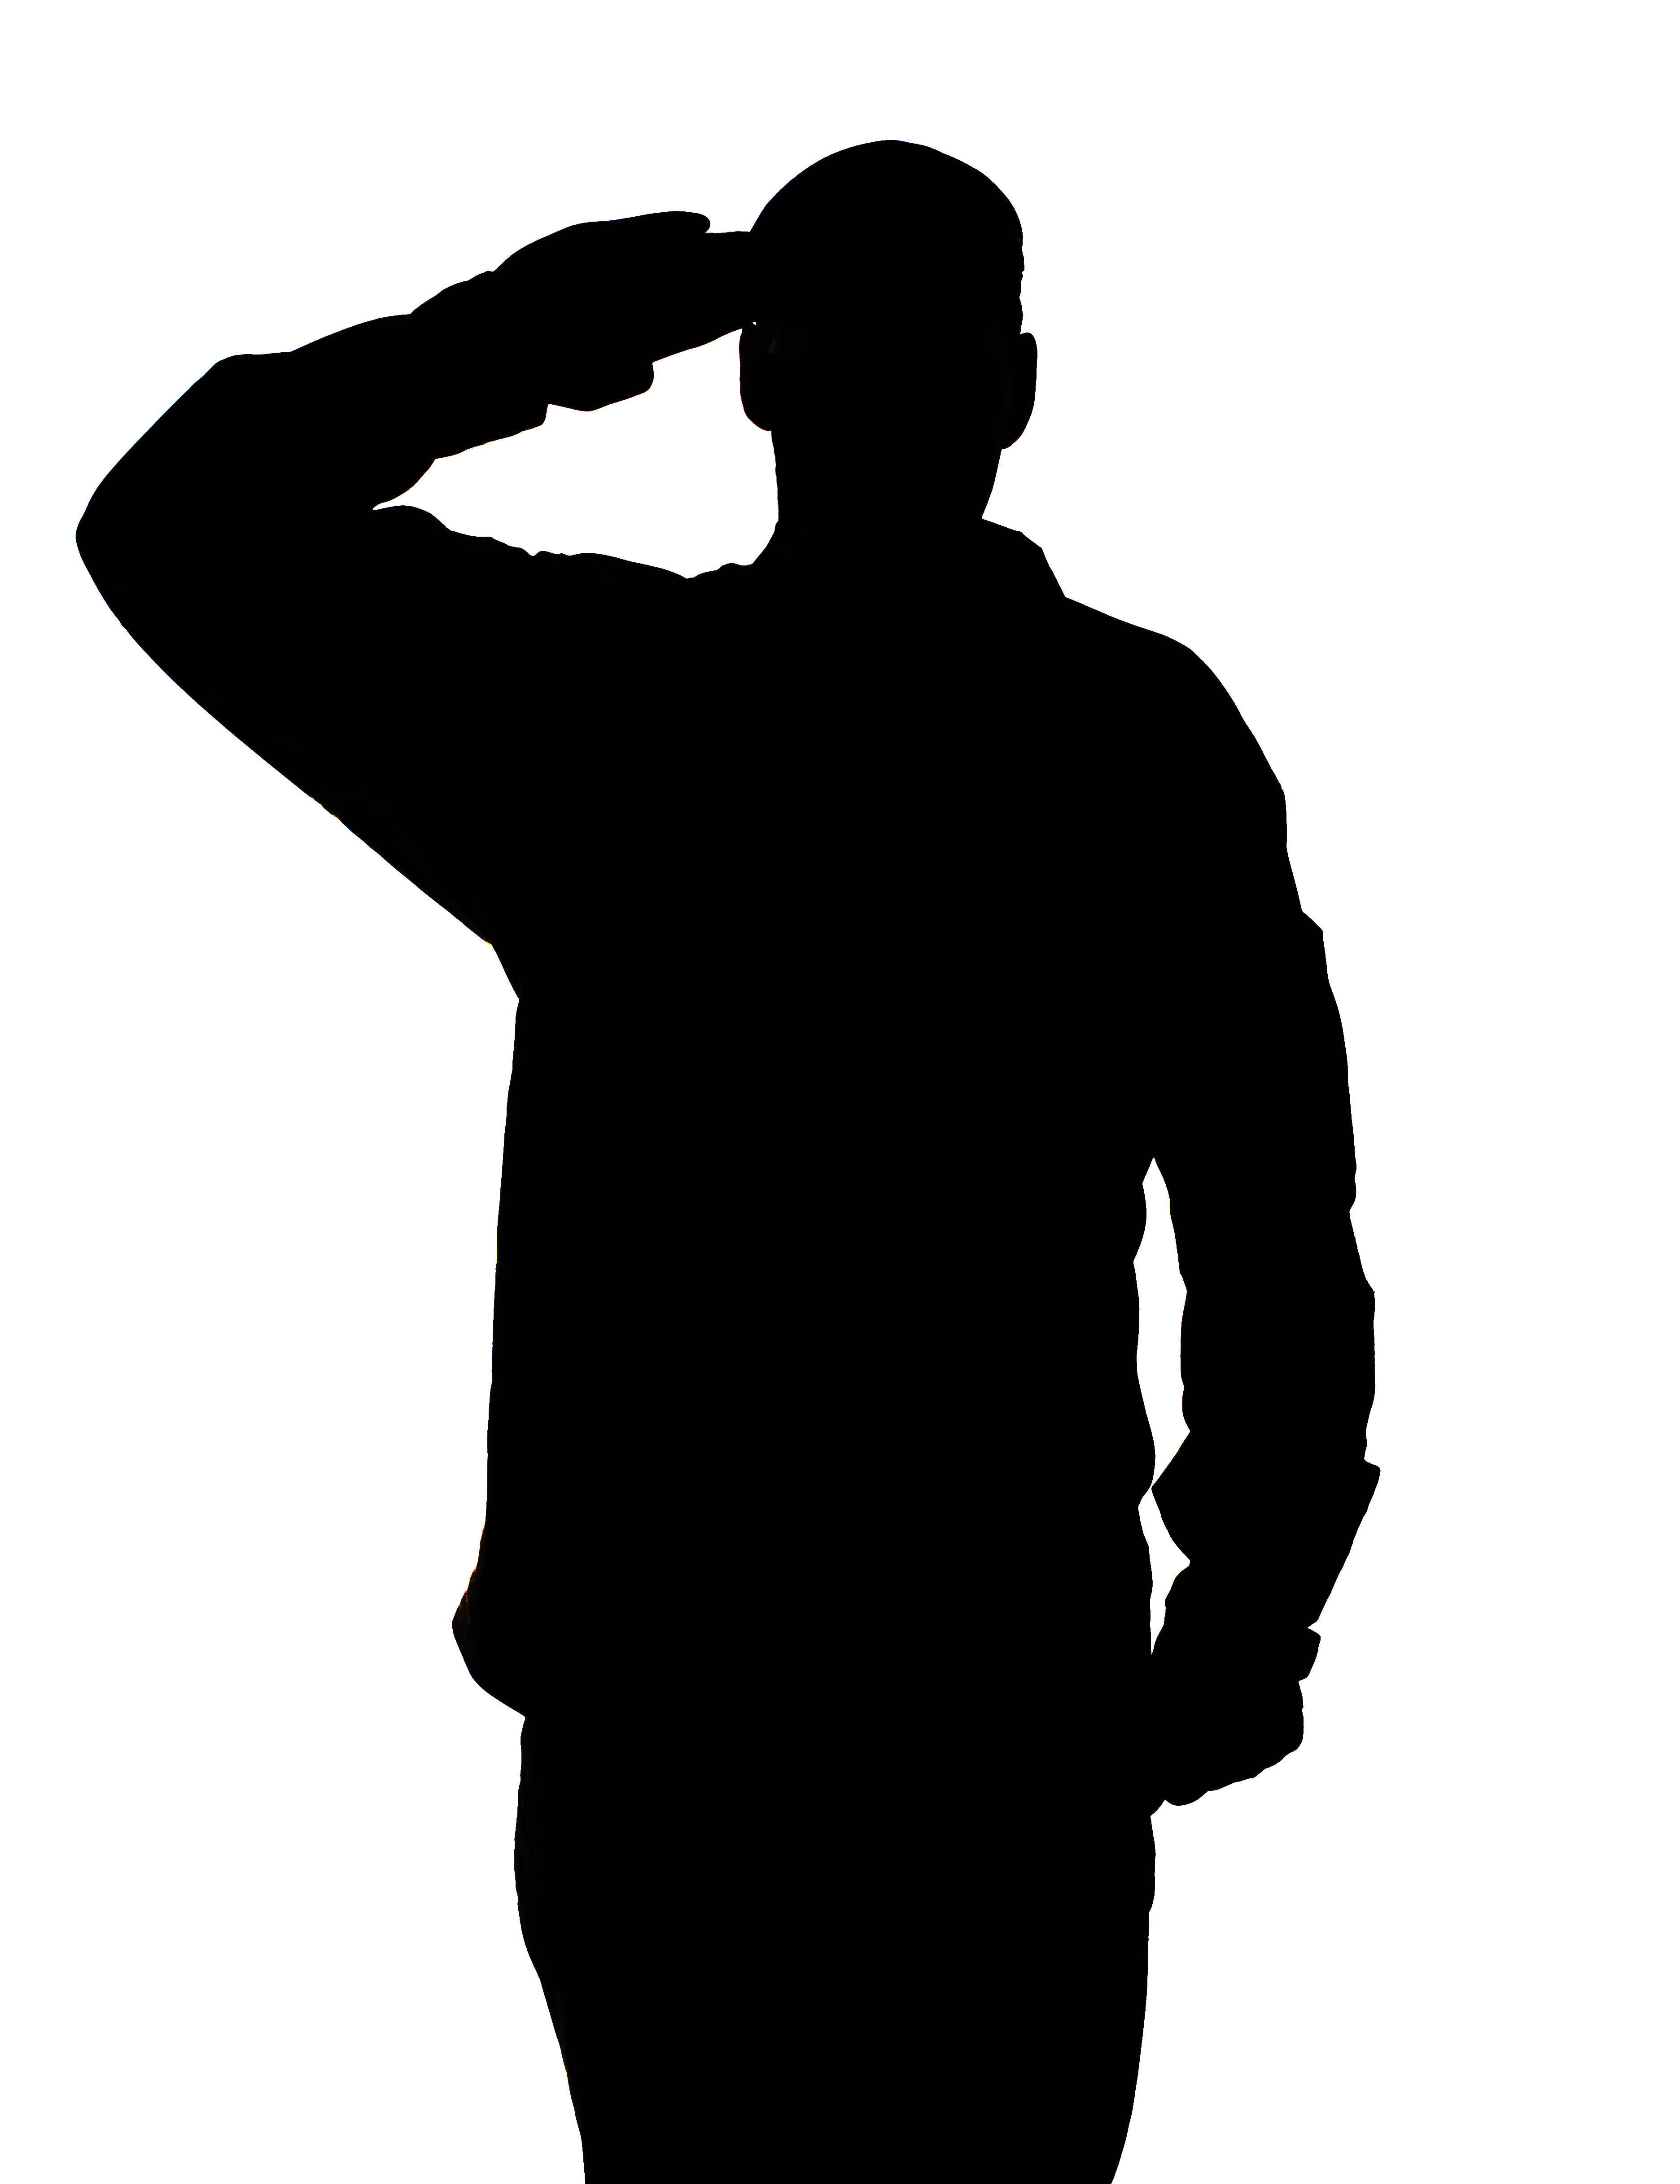 Pix For > Army Salute Clip Art